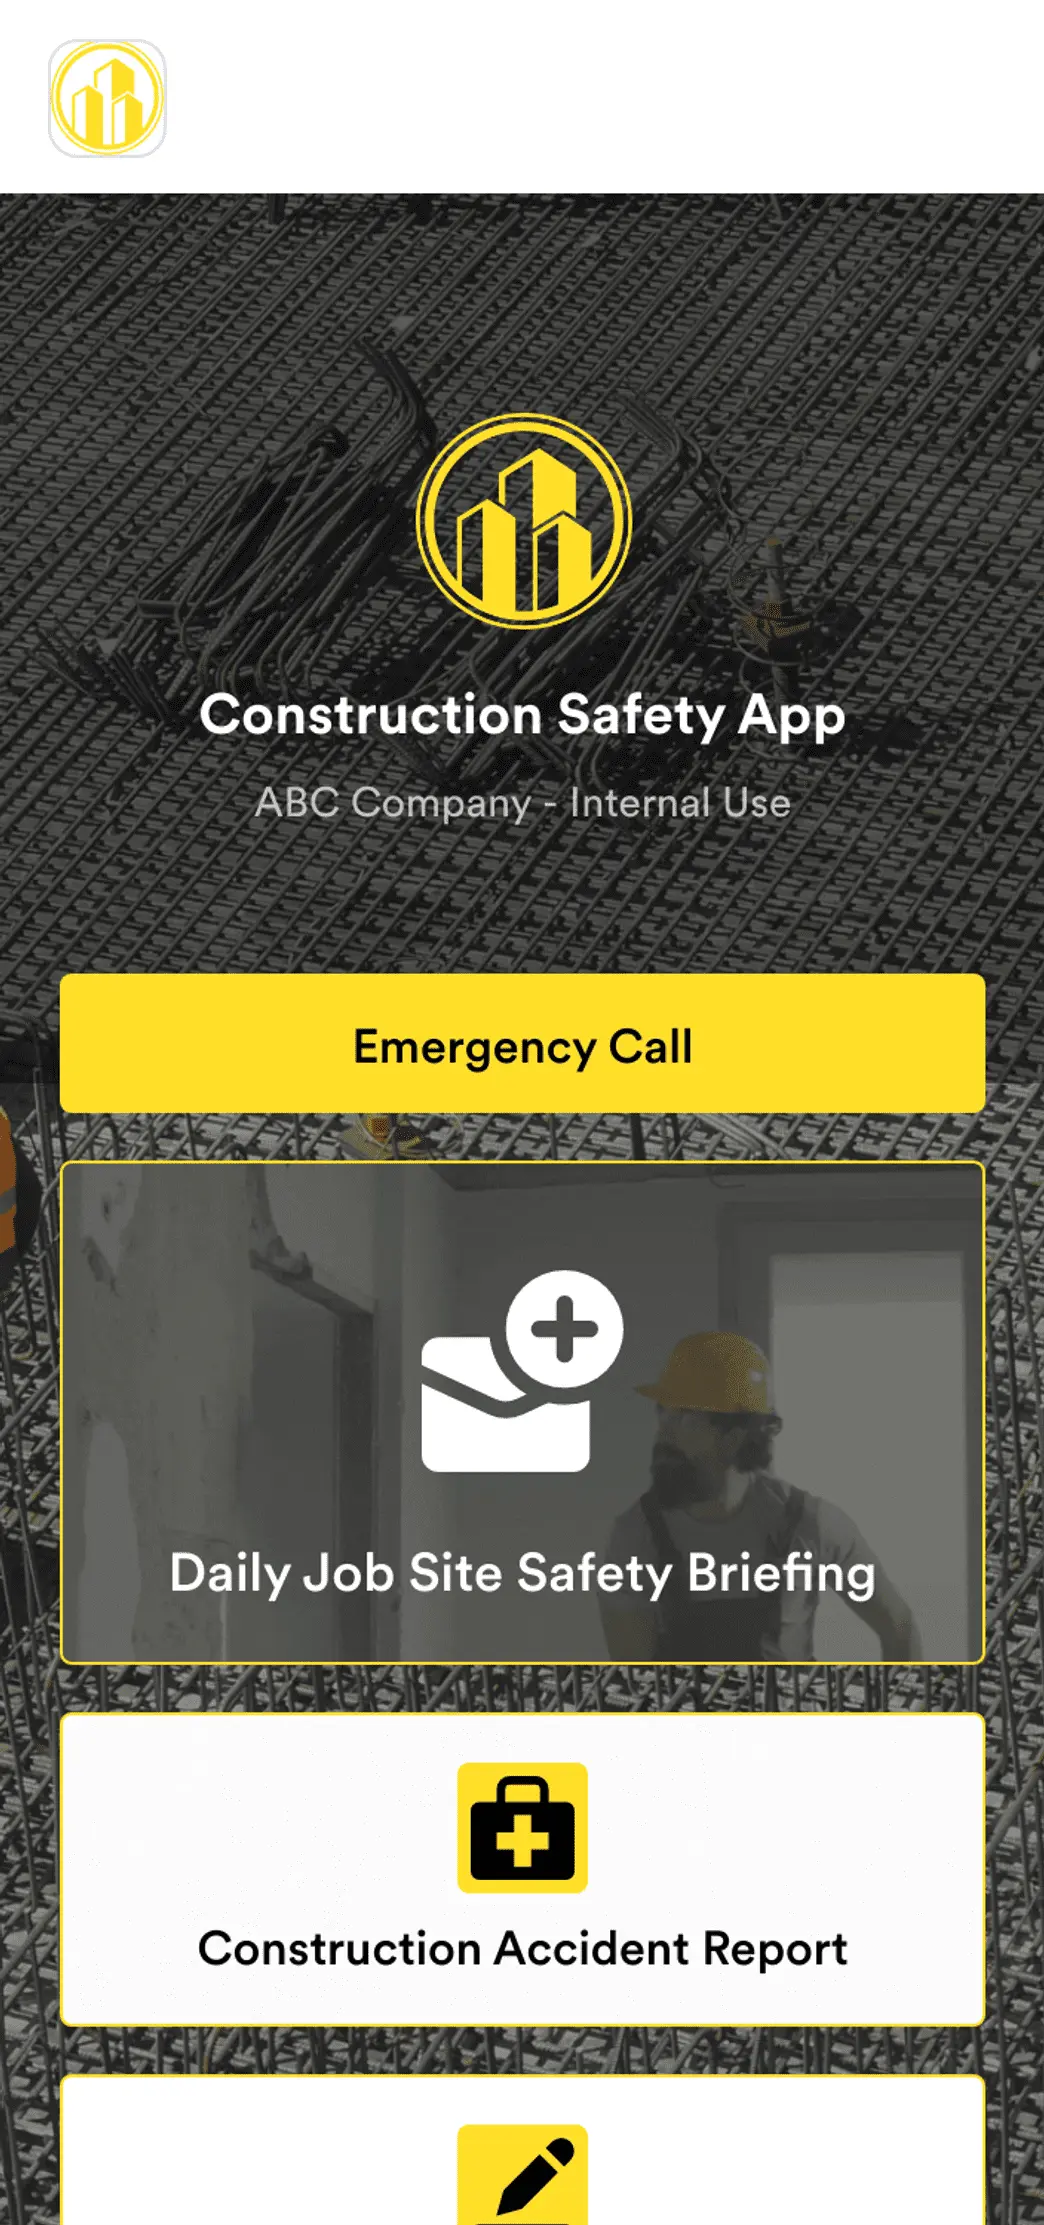 Construction Safety App